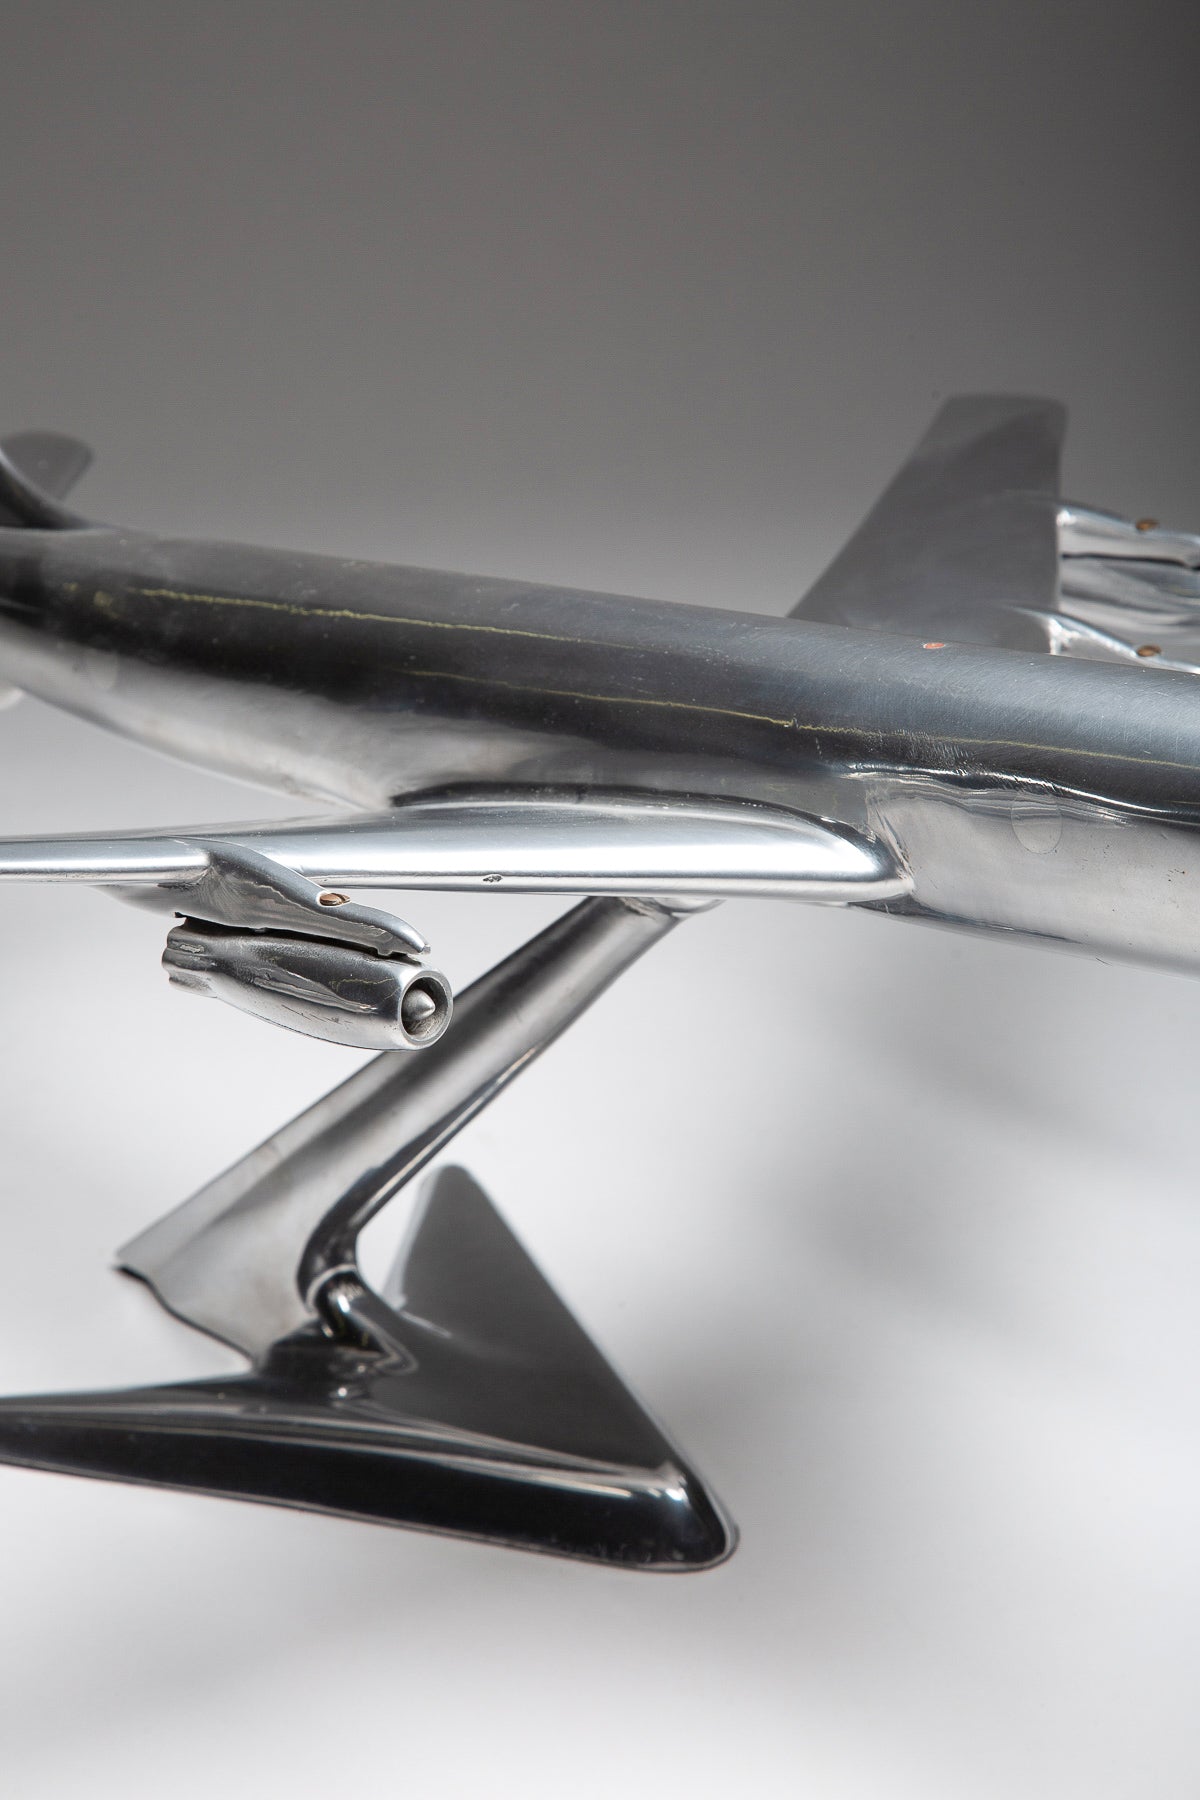 MAXFIELD PRIVATE COLLECTION | ROYAL AIR FORCE 707 MODEL AIRPLANE